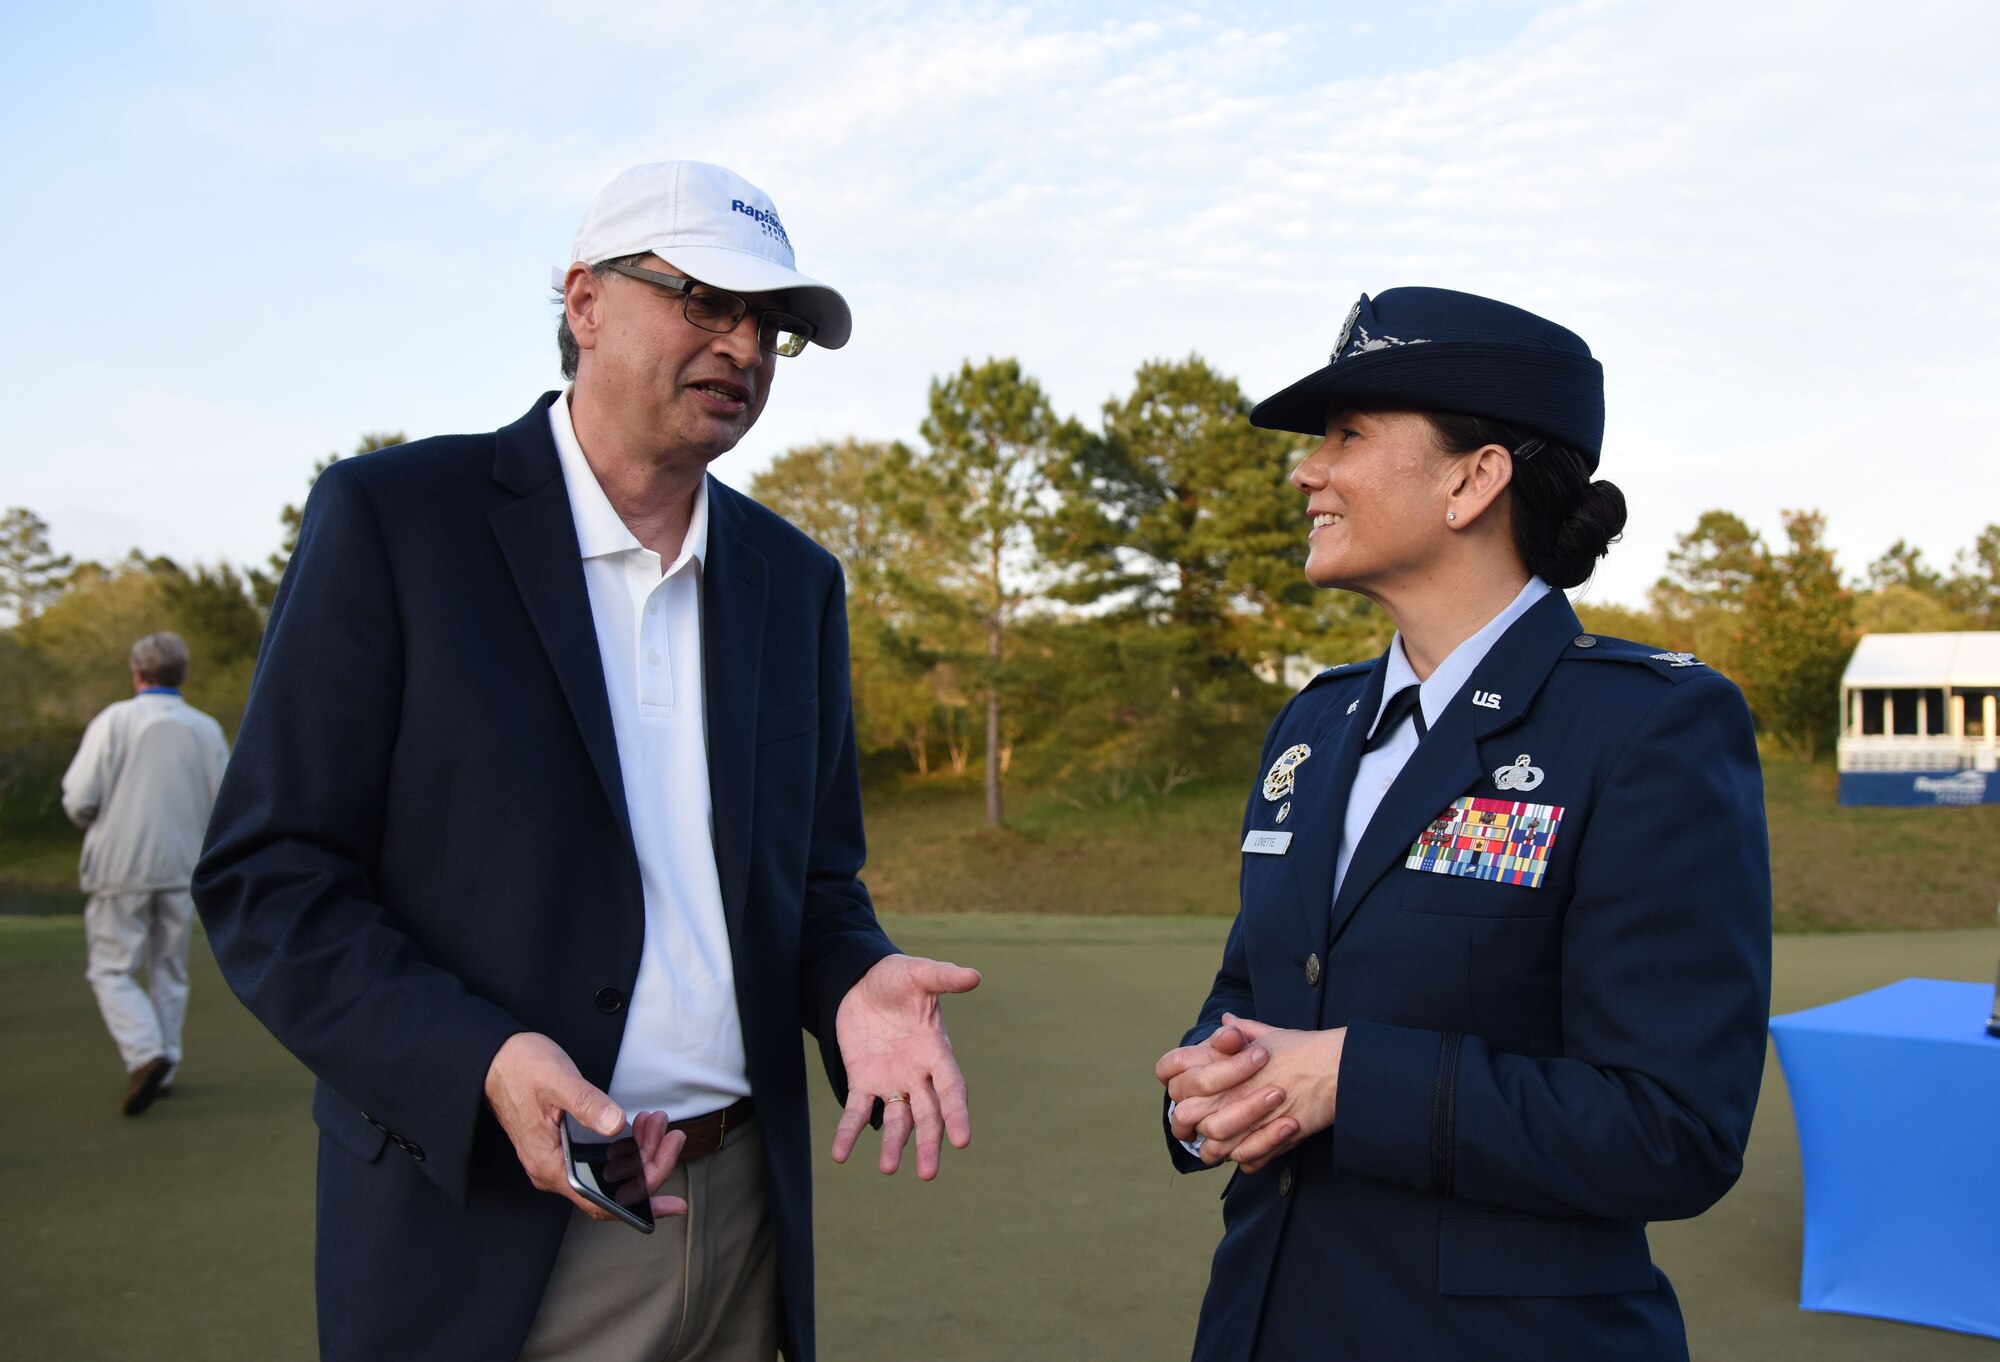 U.S. Air Force Col. Debra Lovette, 81st Training Wing commander, speaks with Ajay Mehra, Rapiscan Systems president, during the Rapiscan Systems Classic Champions Tour at Fallen Oak Golf Club March 25, 2018, in Saucier, Mississippi. Keesler personnel performed the national anthem and presented the colors during the closing ceremony of the three-day event. (U.S. Air Force photo by Kemberly Groue)